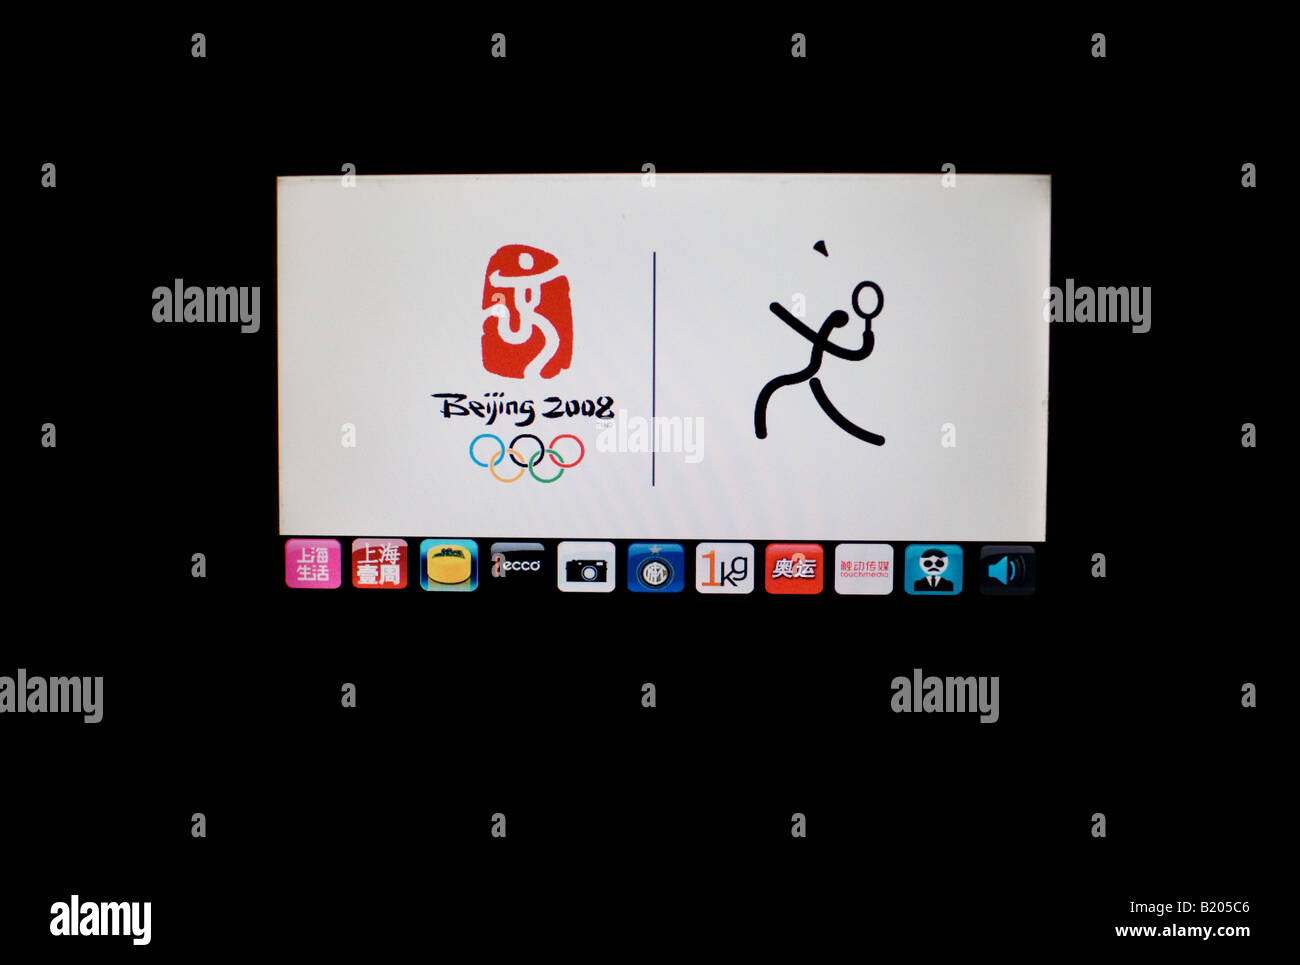 Beijing 2008 Olympics advertisement with mascots on passenger video screen in taxicab Shanghai China Stock Photo